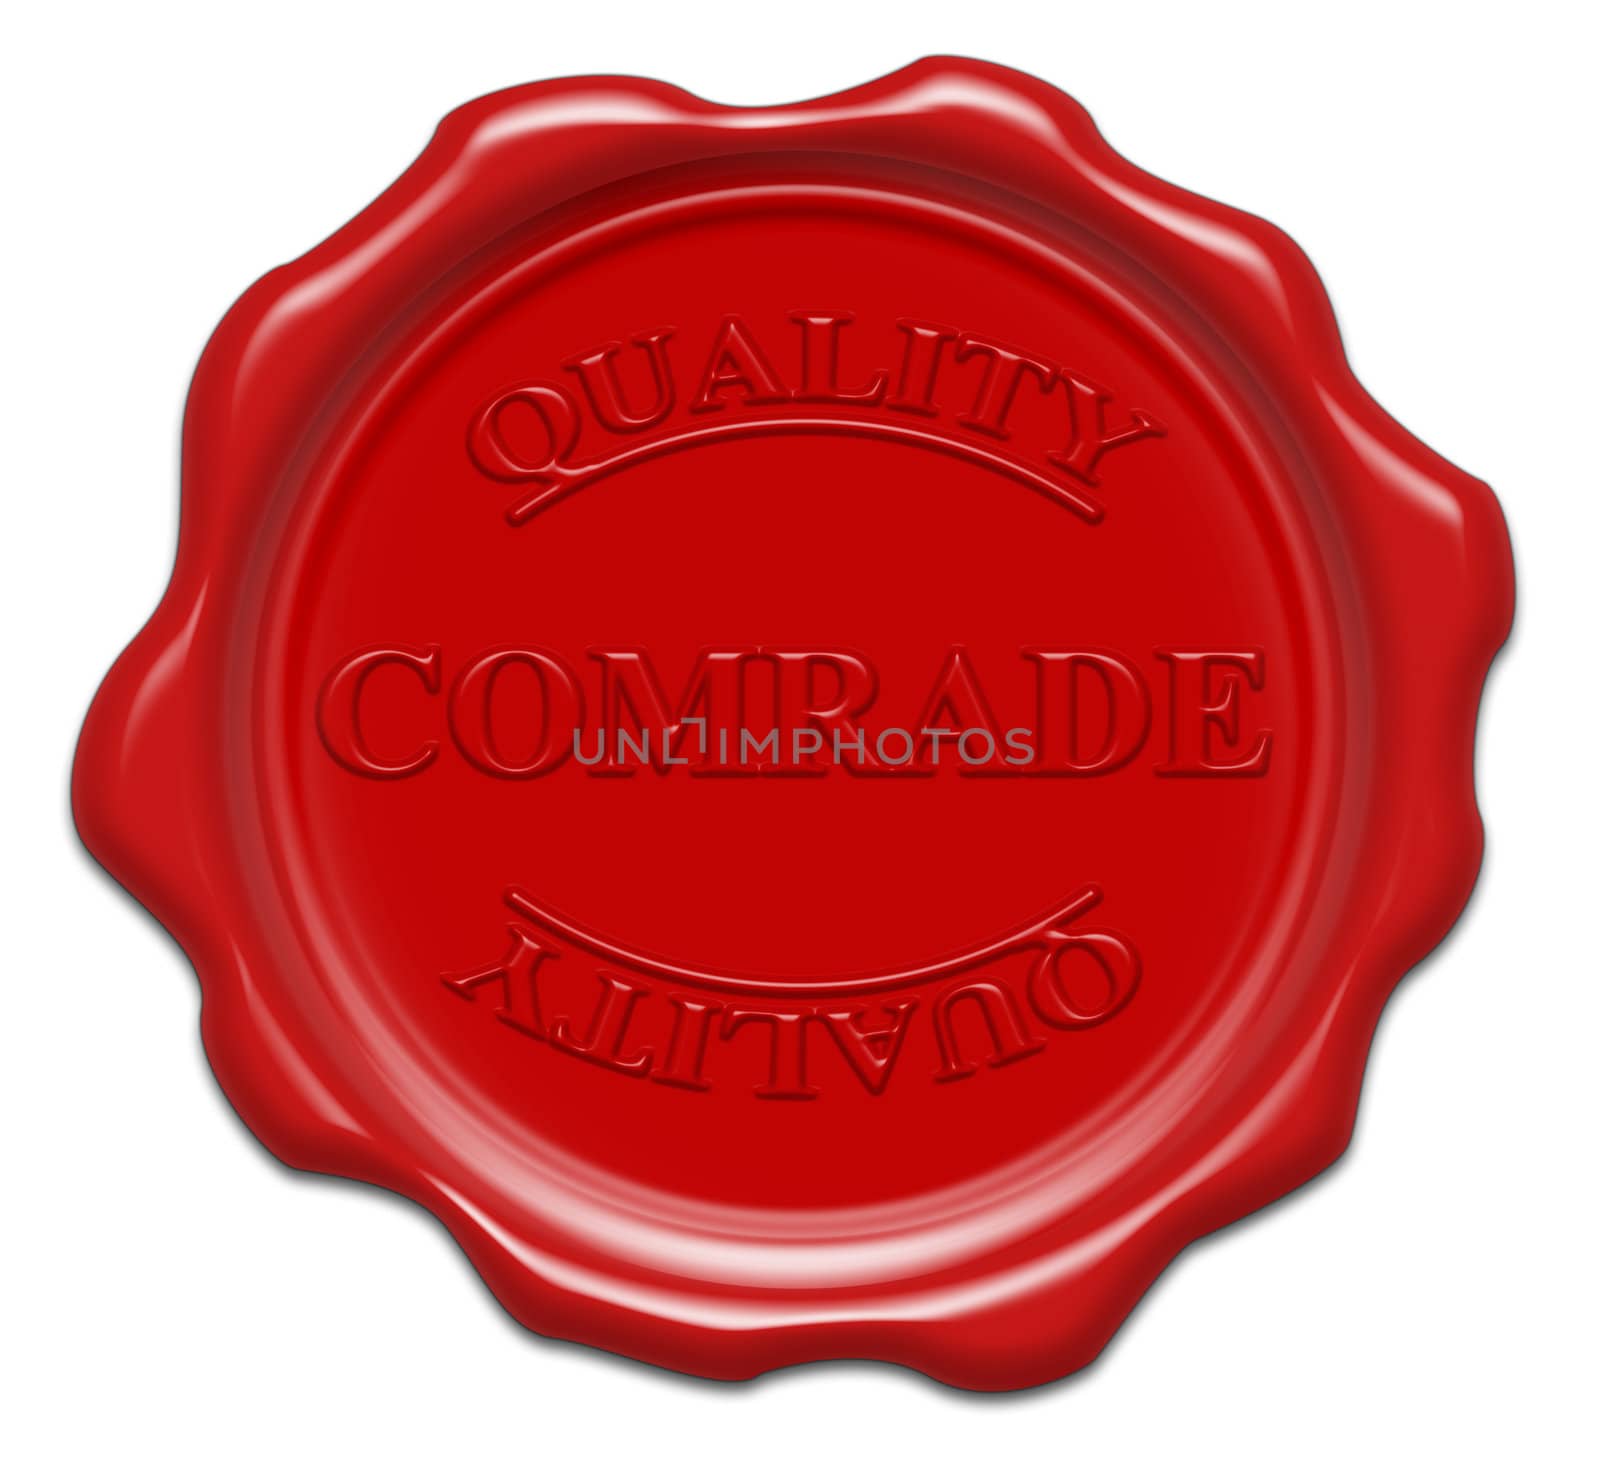 quality comrade - illustration red wax seal isolated on white ba by mozzyb